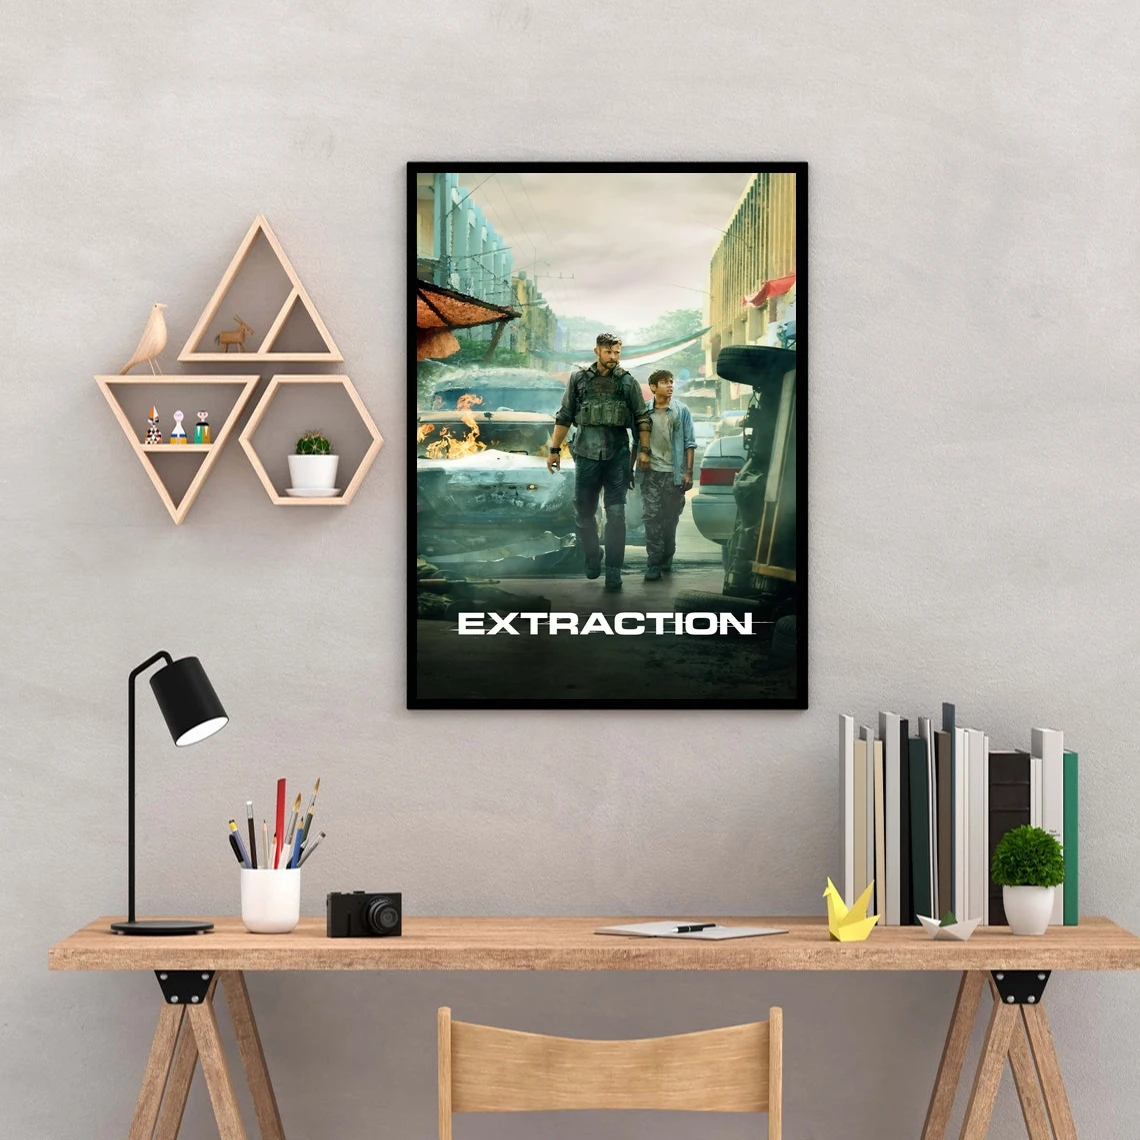 

Extraction 2020 Movie Cover Poster Art Print Canvas Painting Wall Pictures Living Room Home Decor (No Frame)